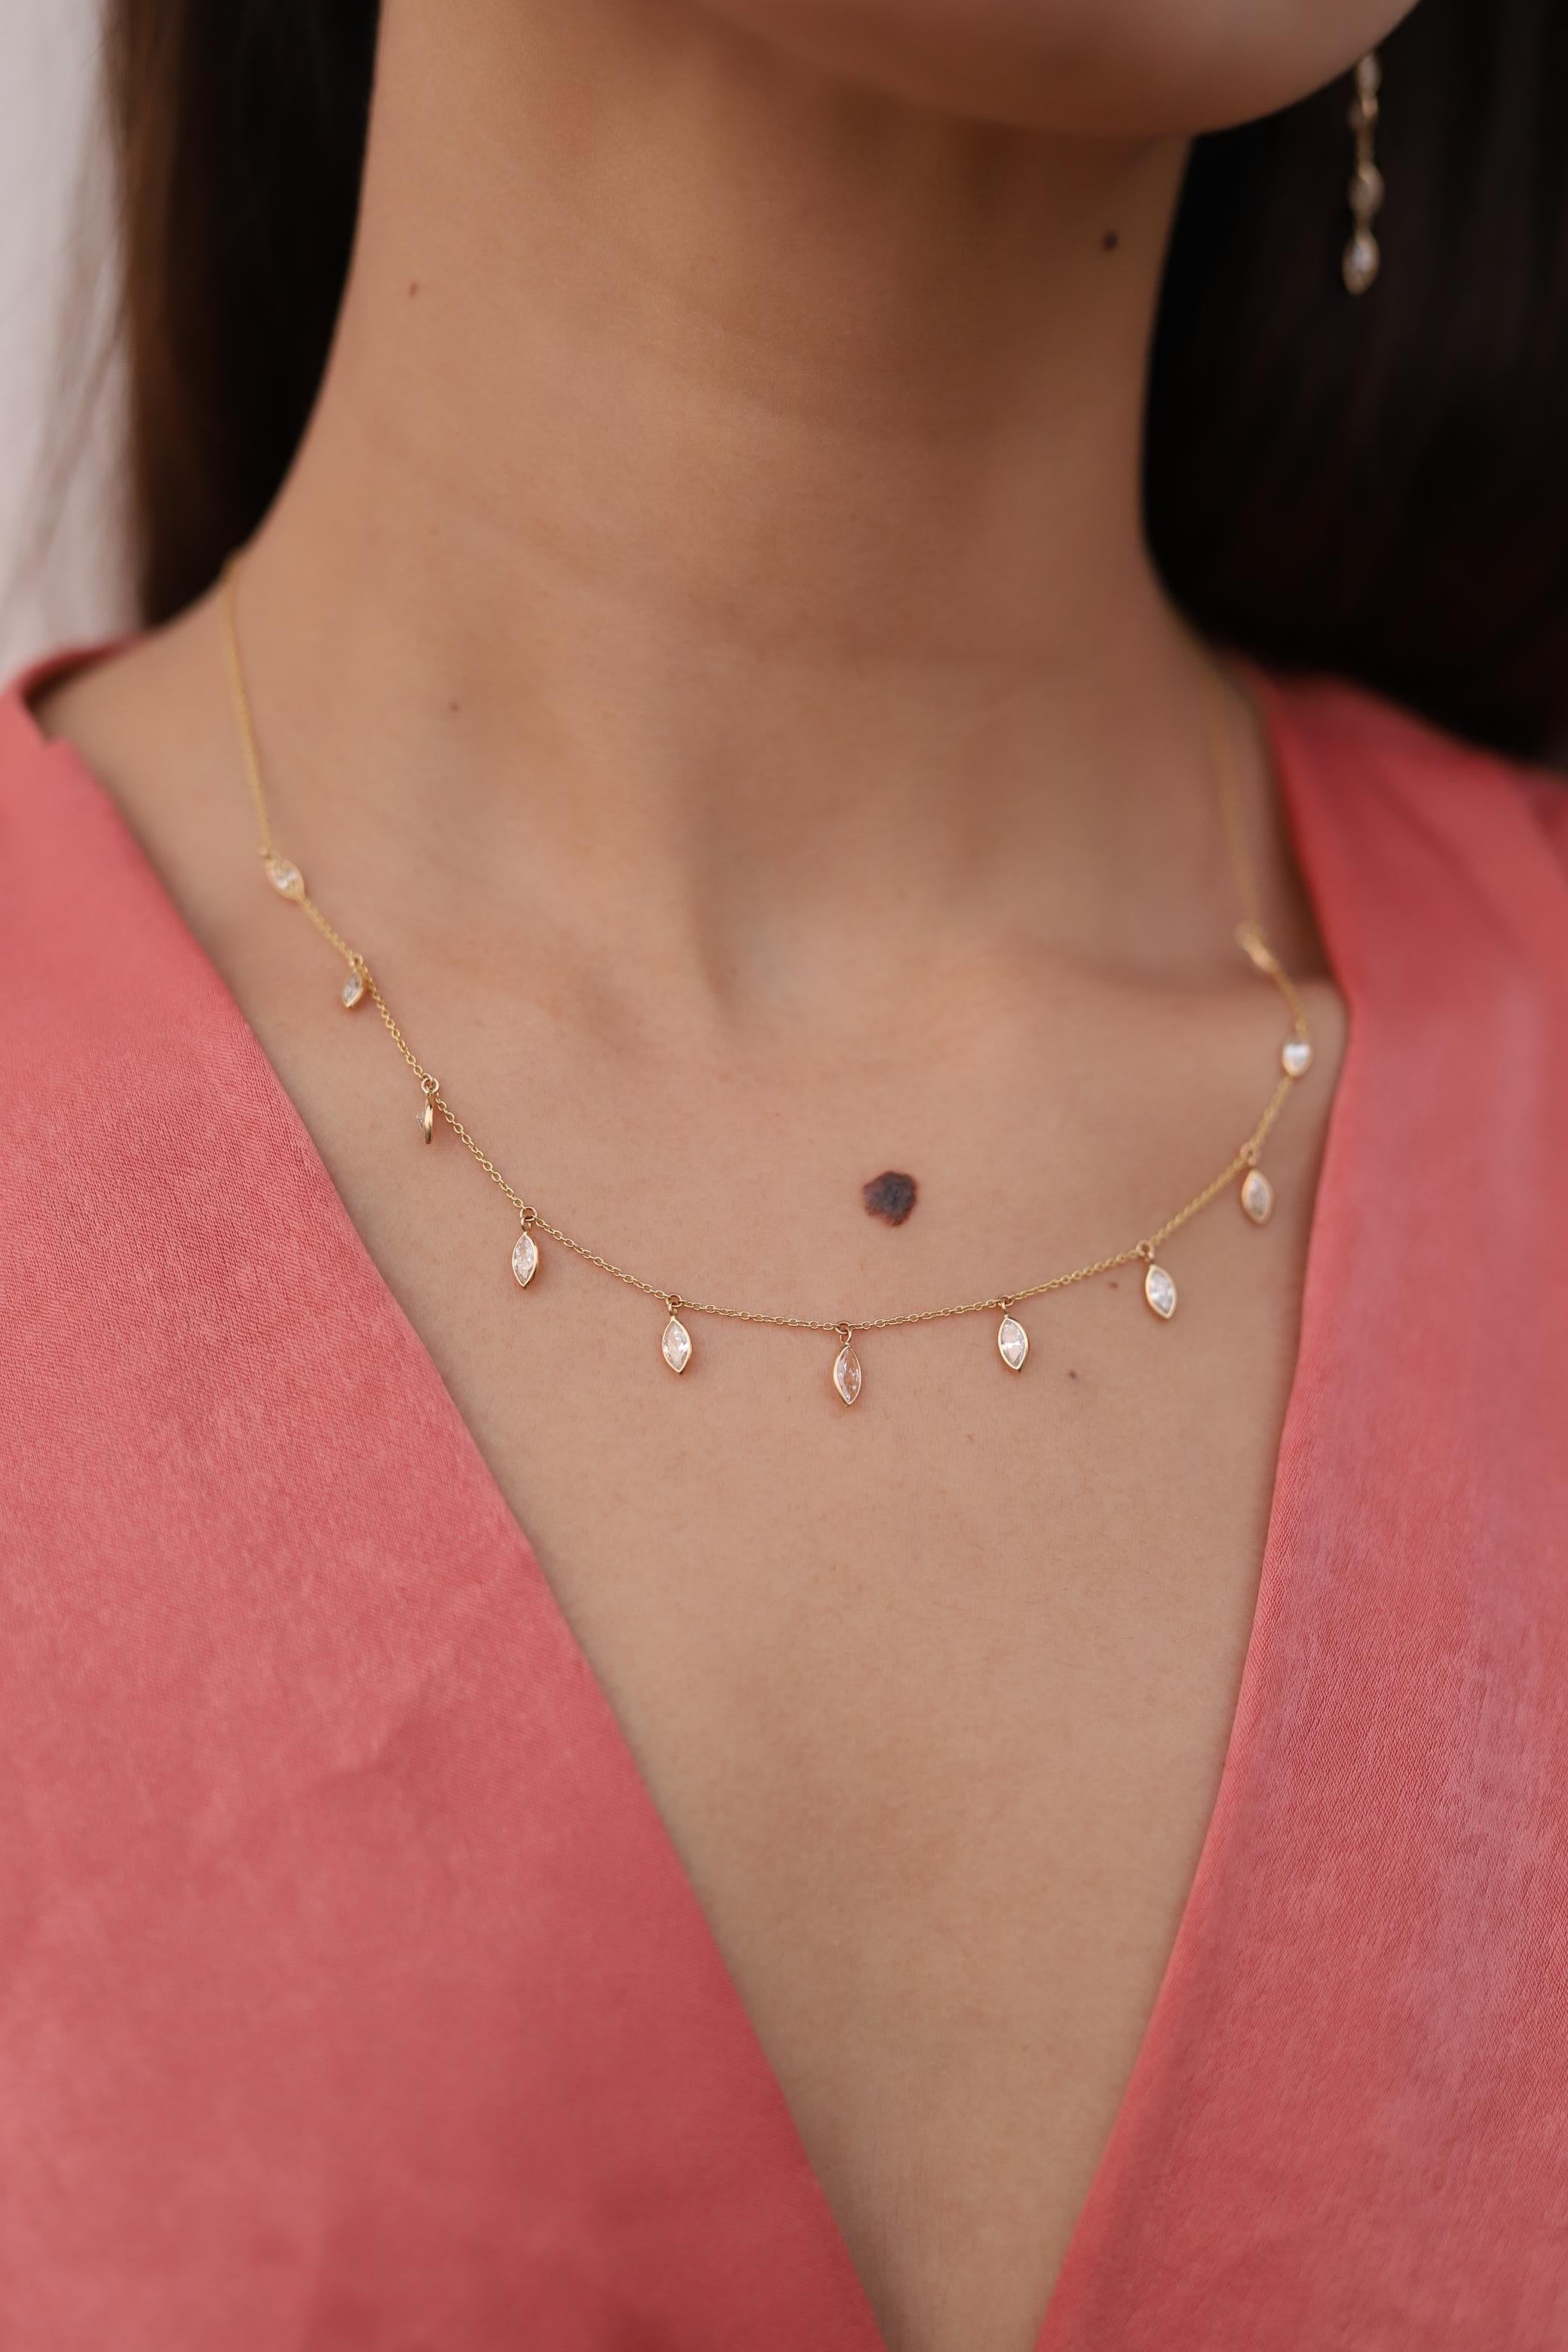 Diamond Necklace in 18K Gold studded with marquise cut diamonds.
Accessorize your look with this elegant diamond drop necklace. This stunning piece of jewelry instantly elevates a casual look or dressy outfit. Comfortable and easy to wear, it is